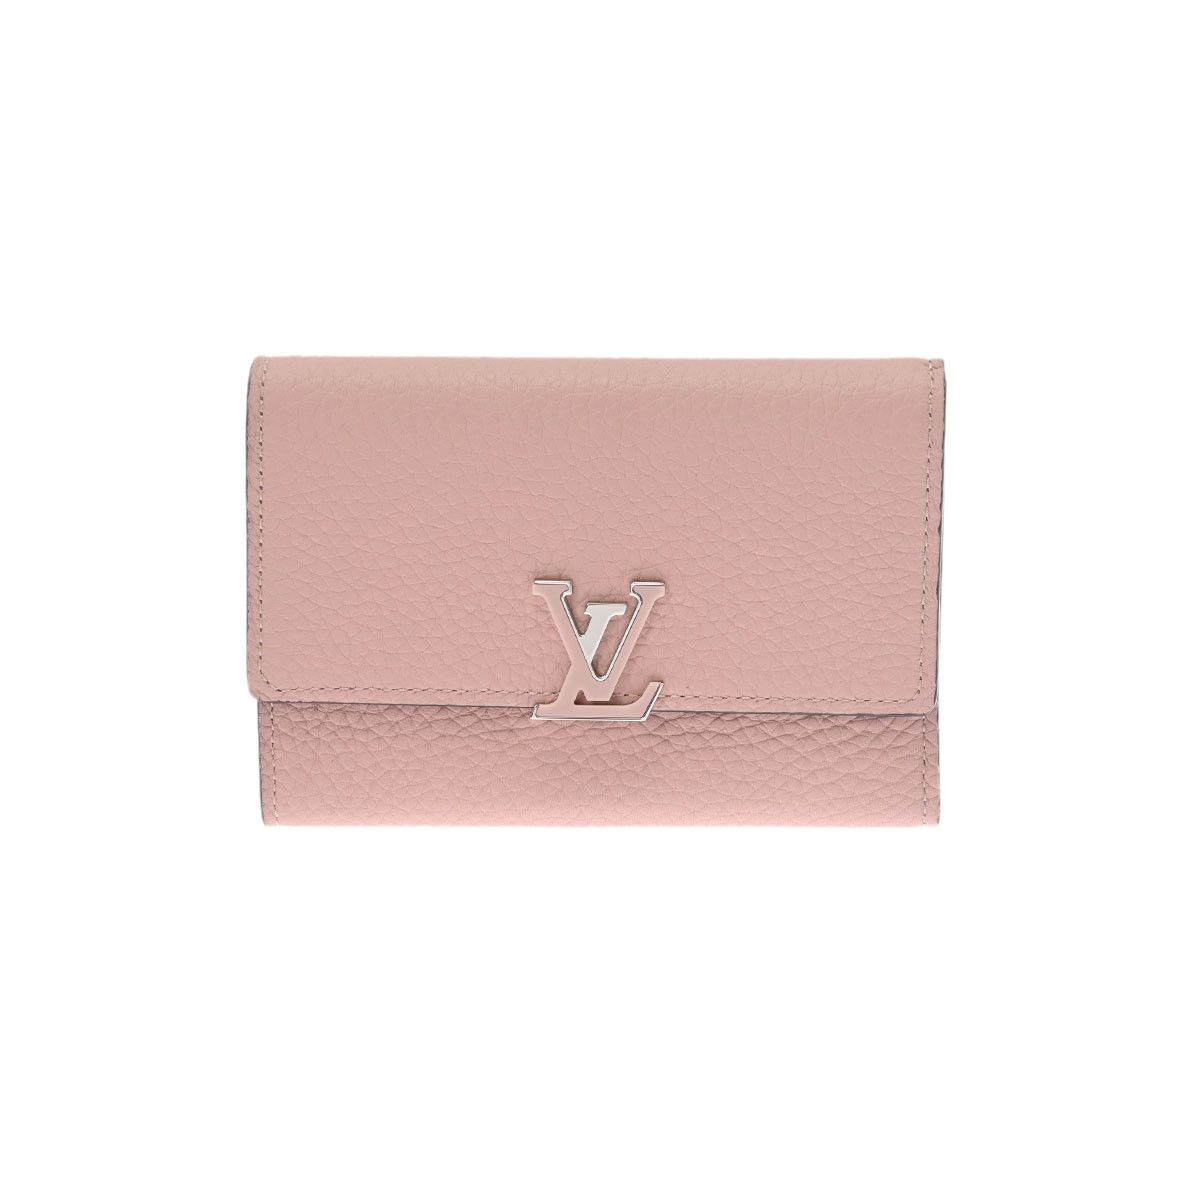 SOLD - LV Capucines Compact Wallet Magnolia (Hot-Stamping)_Purse/Wallet_ACCESSORIES_MILAN  CLASSIC Luxury Trade Company Since 2007